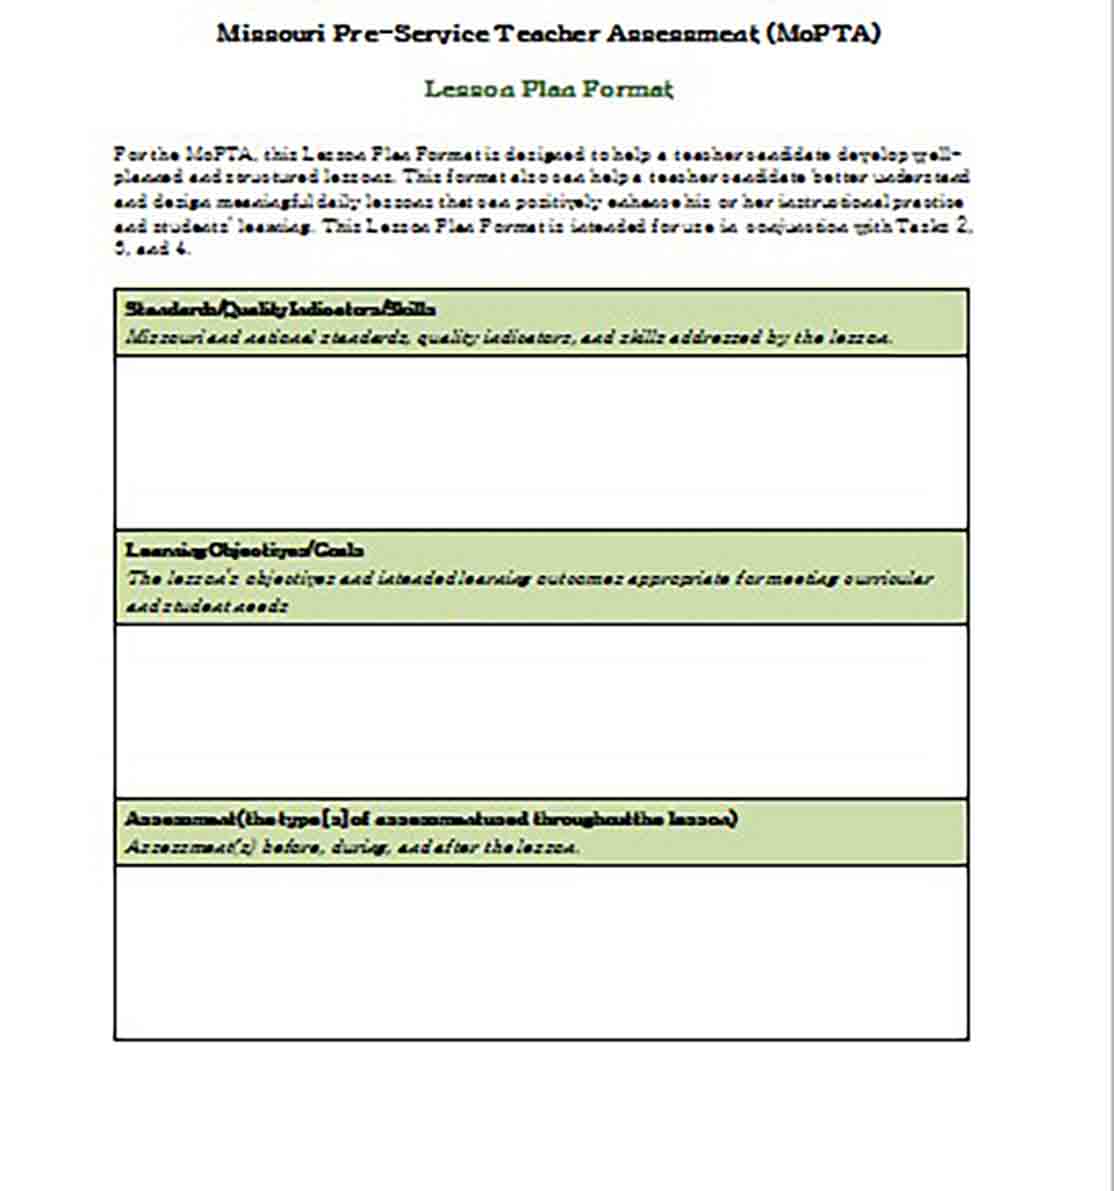 Lesson Plan Format templates Word